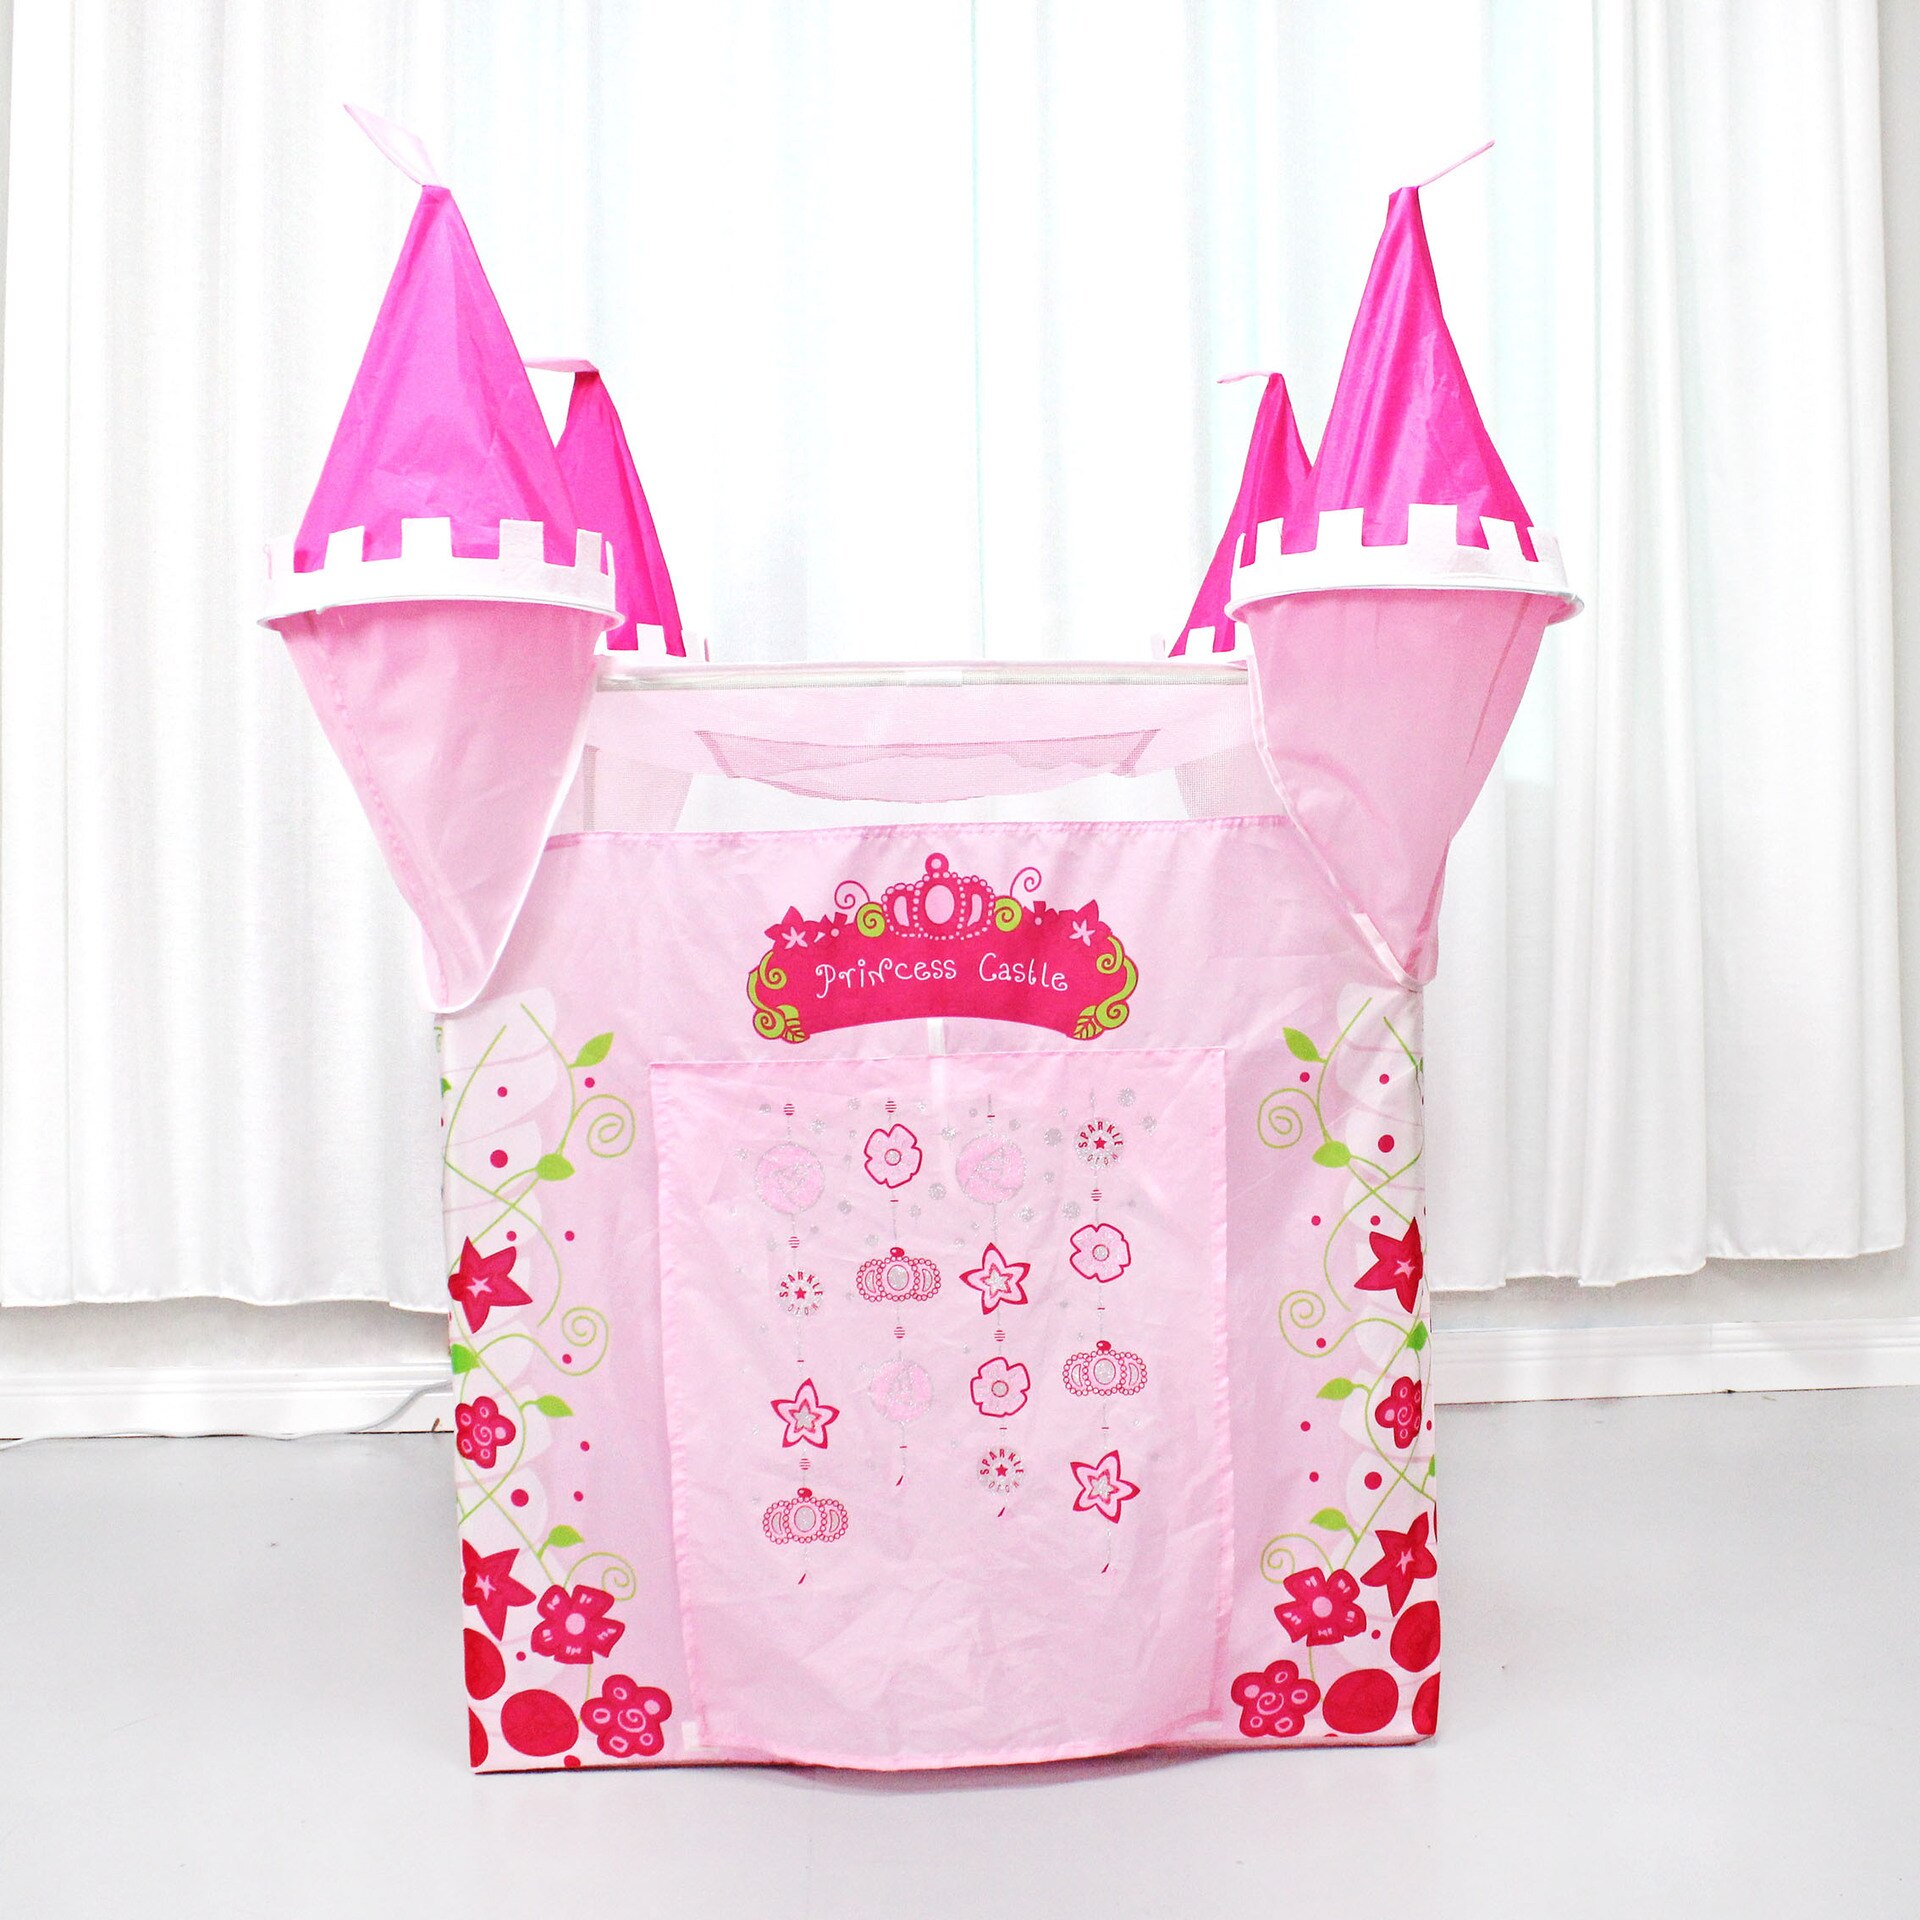 New-Child-Toys-Tents-Princess-Castle-Play-Tent-Girl-Princess-Play-House-Indoor-Outdoor-Kids-Housees-2